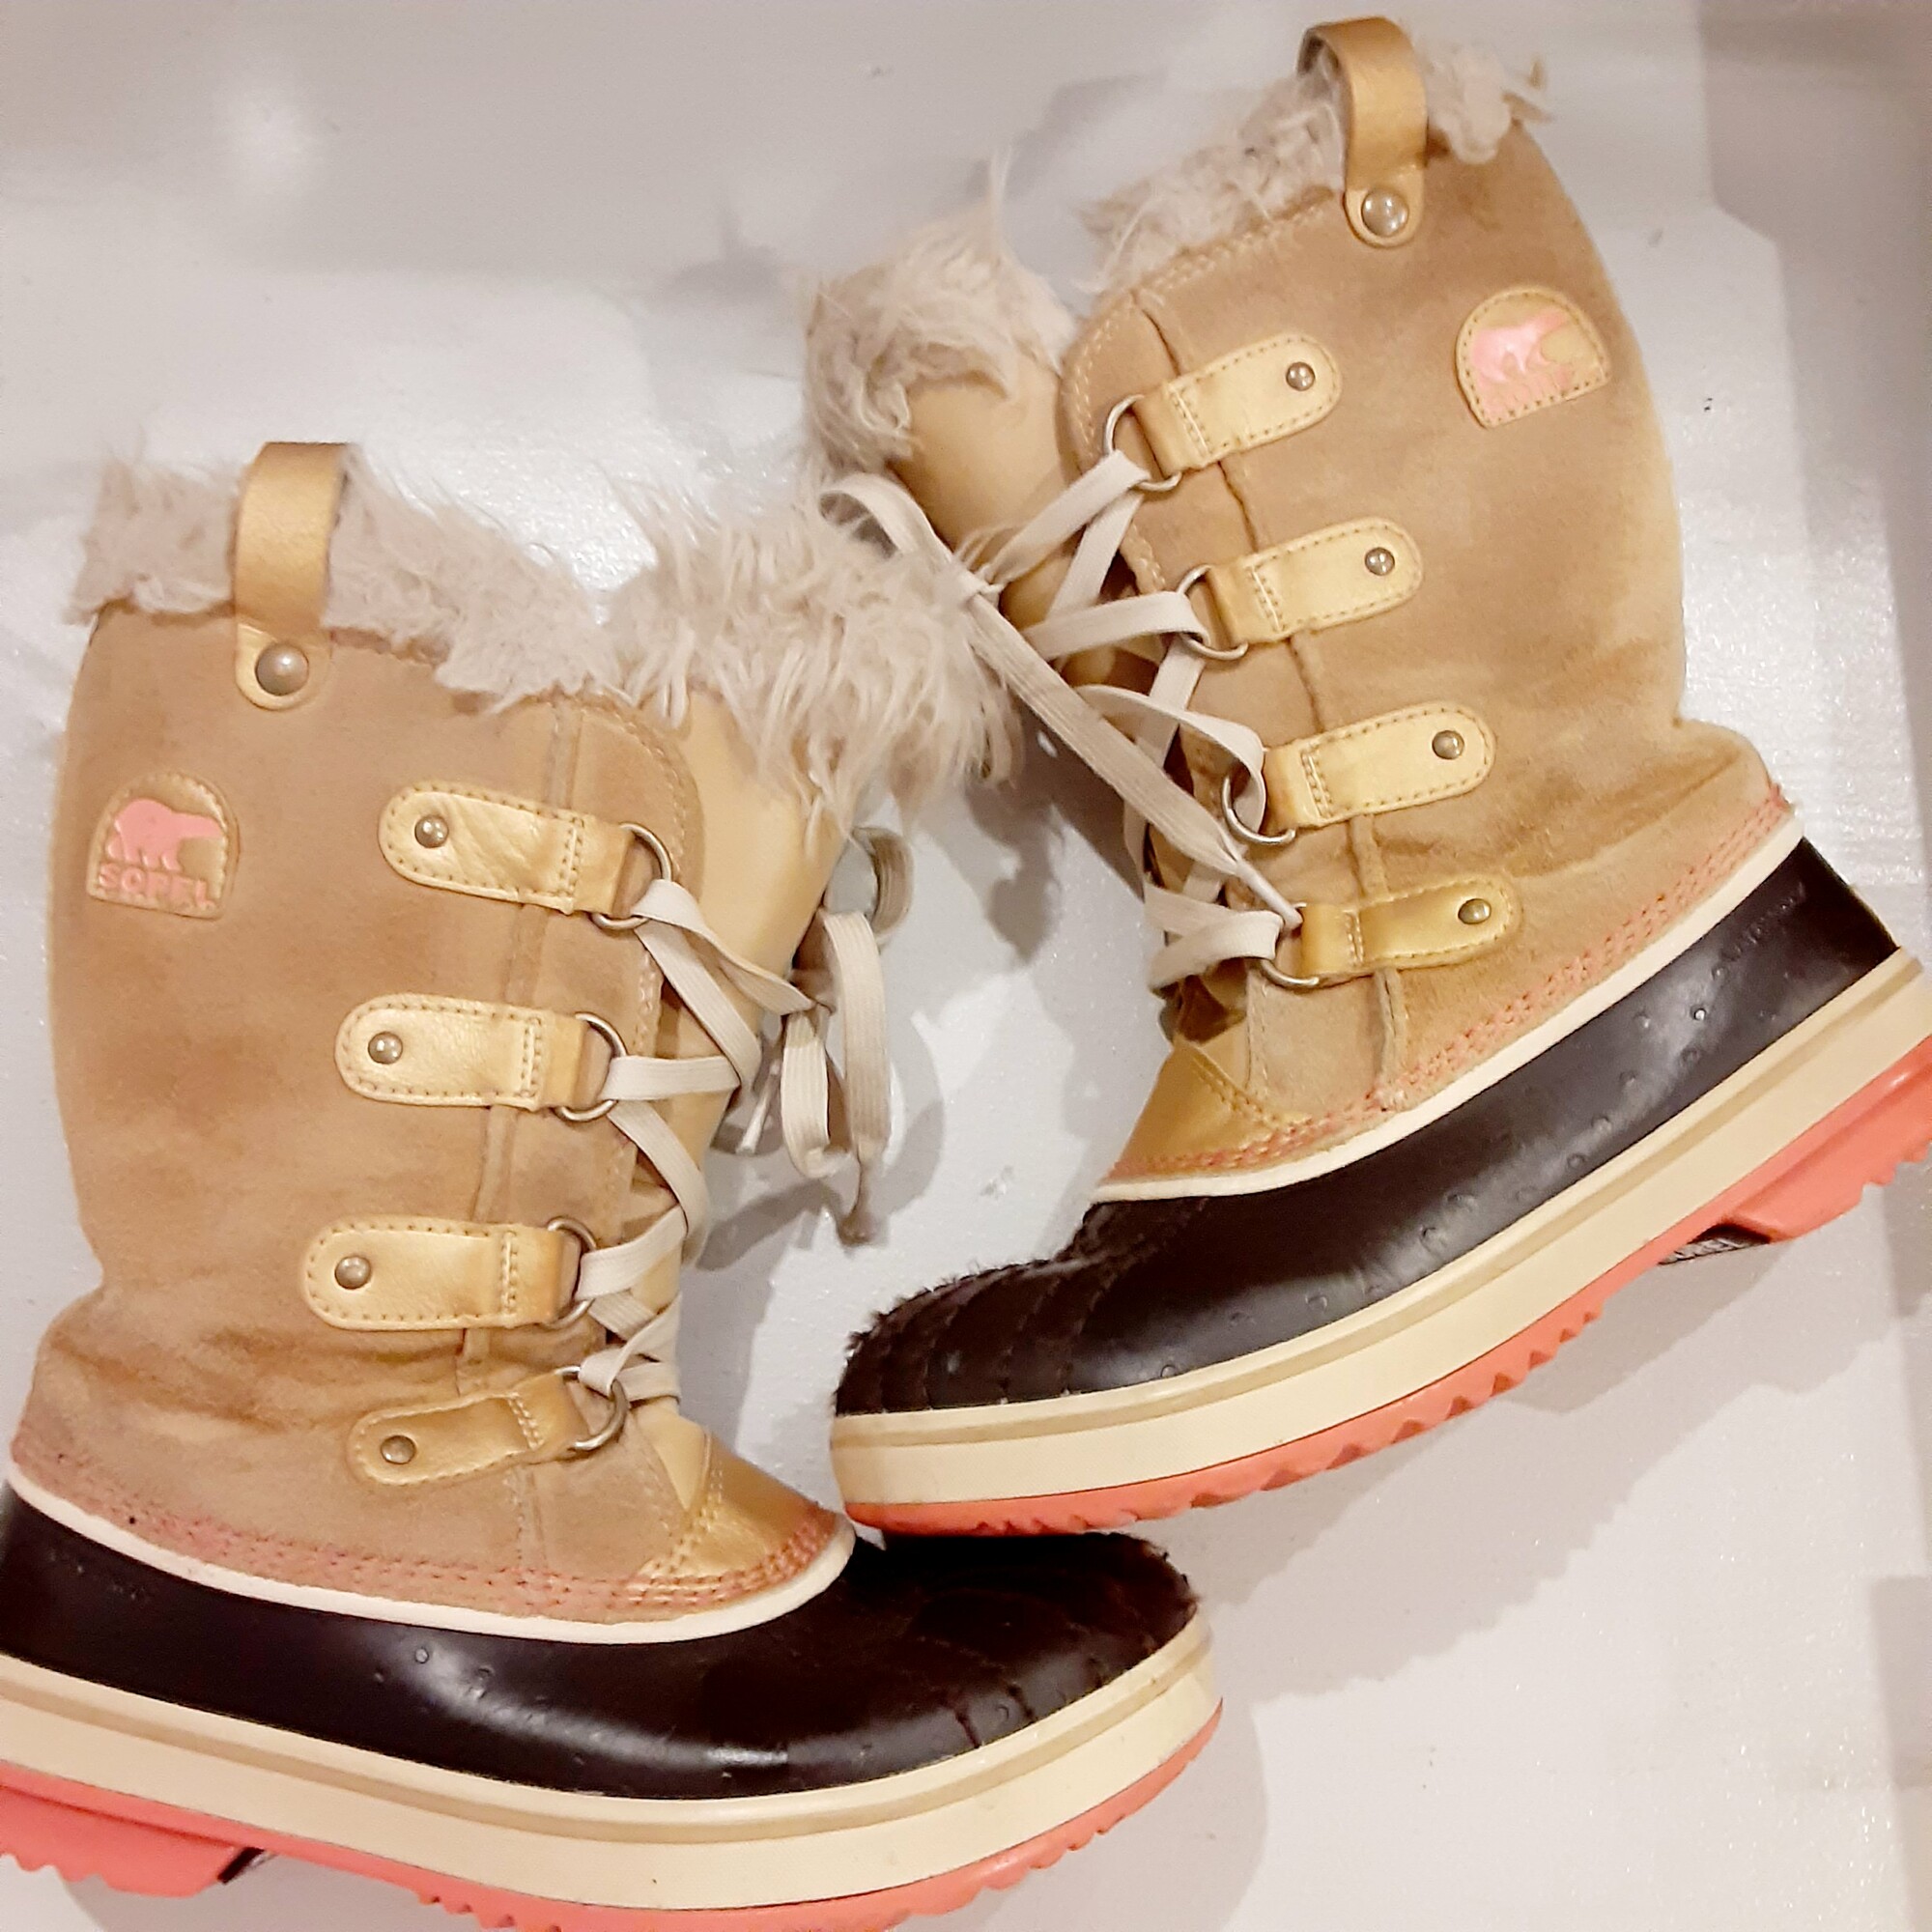 *Sorel Snow Boot, Size: 3
Overall wear
SOLD AS IS